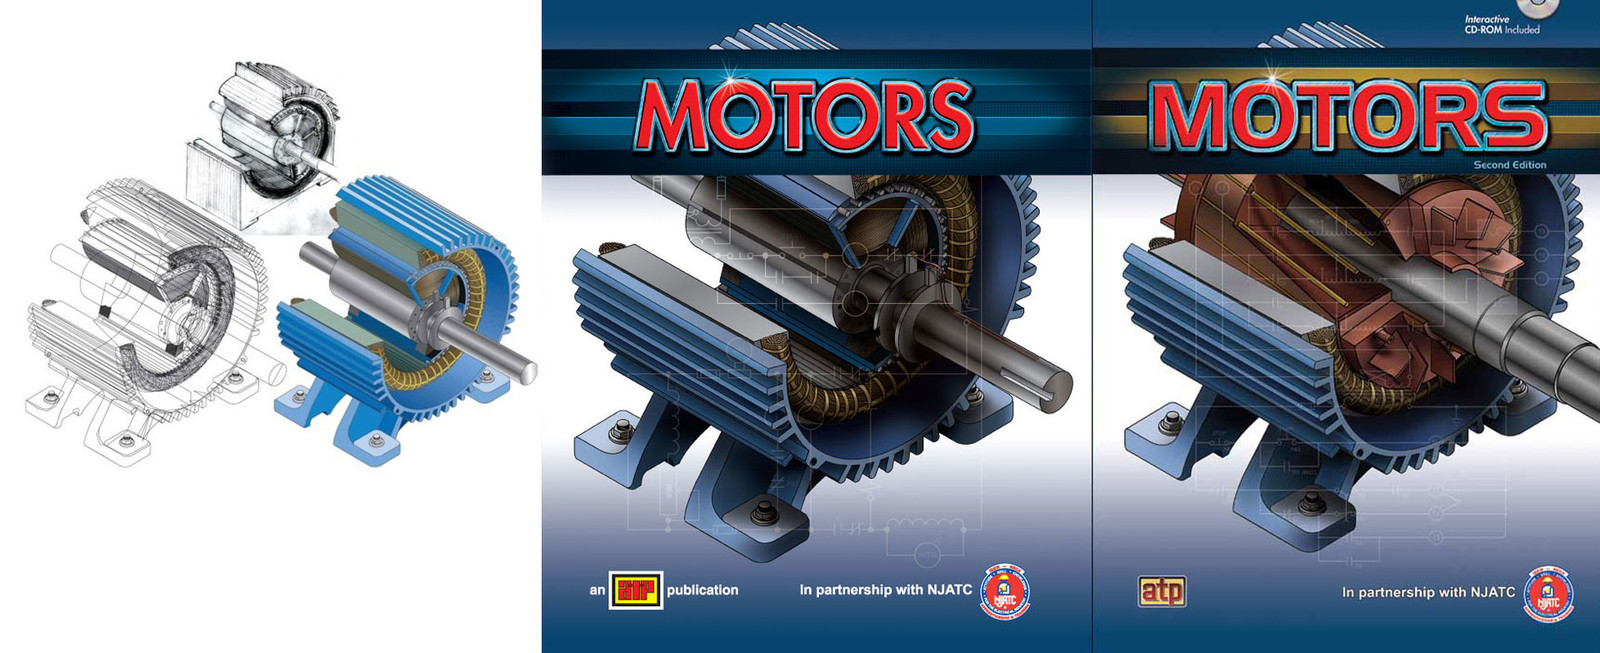 Covers from the first and second editions of Motors. These motor cutaways were hand drawn first and then recreated isometrically in Illustrator. At the time, I was just starting to learn 3D and these specific images were the inspiration to learn it.